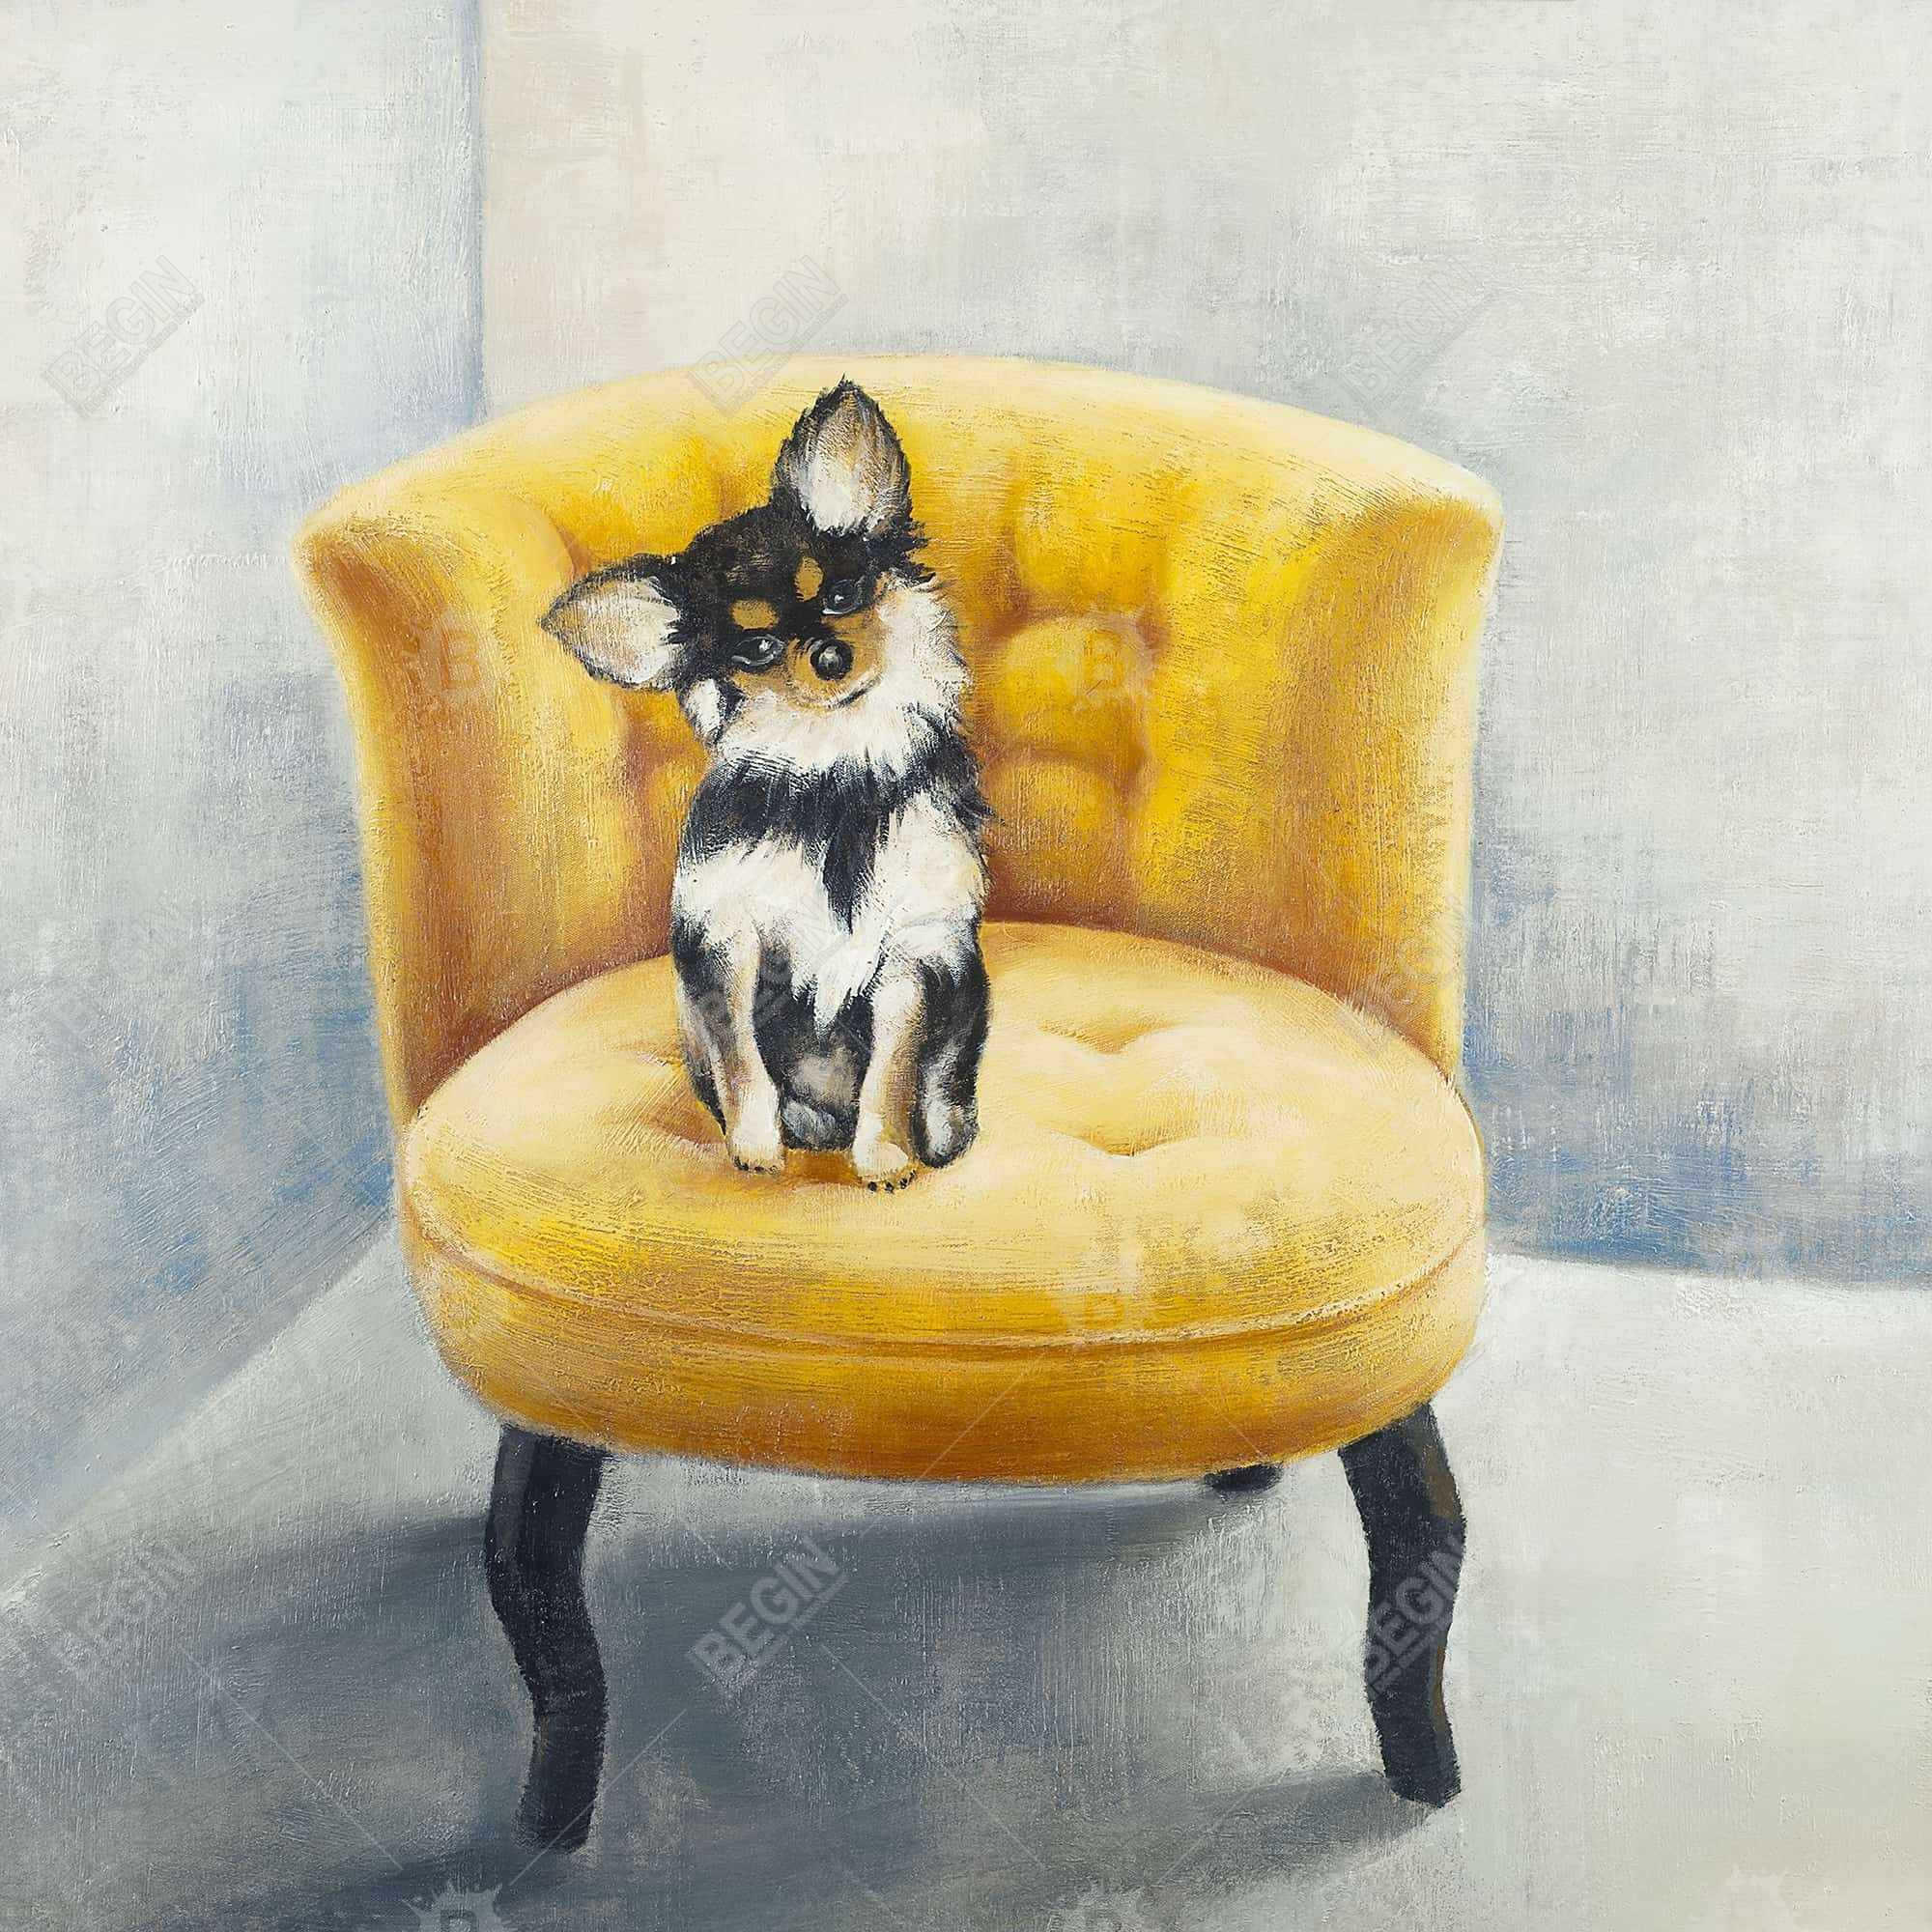 Long-haired chihuahua on a yellow armchair